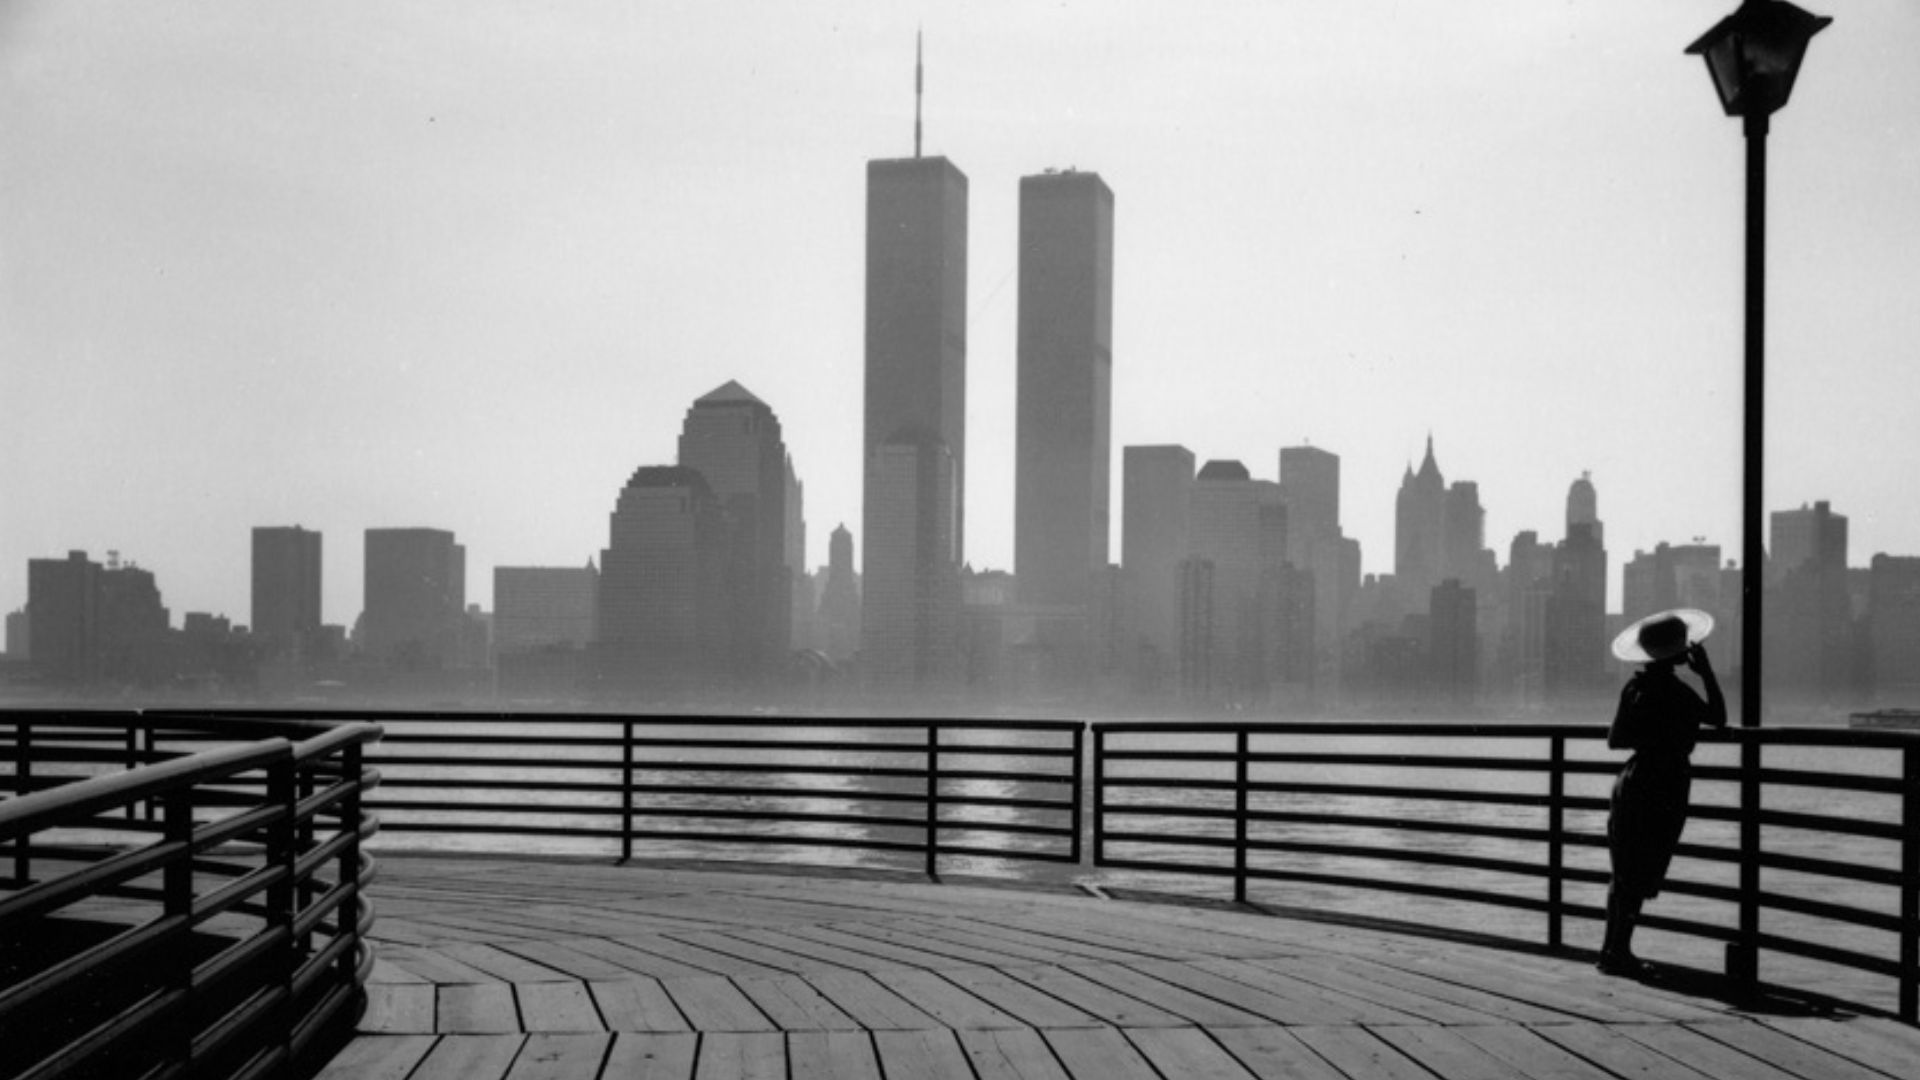 Black and white image of the Twin Towers as seen from across the river on a cloudy day